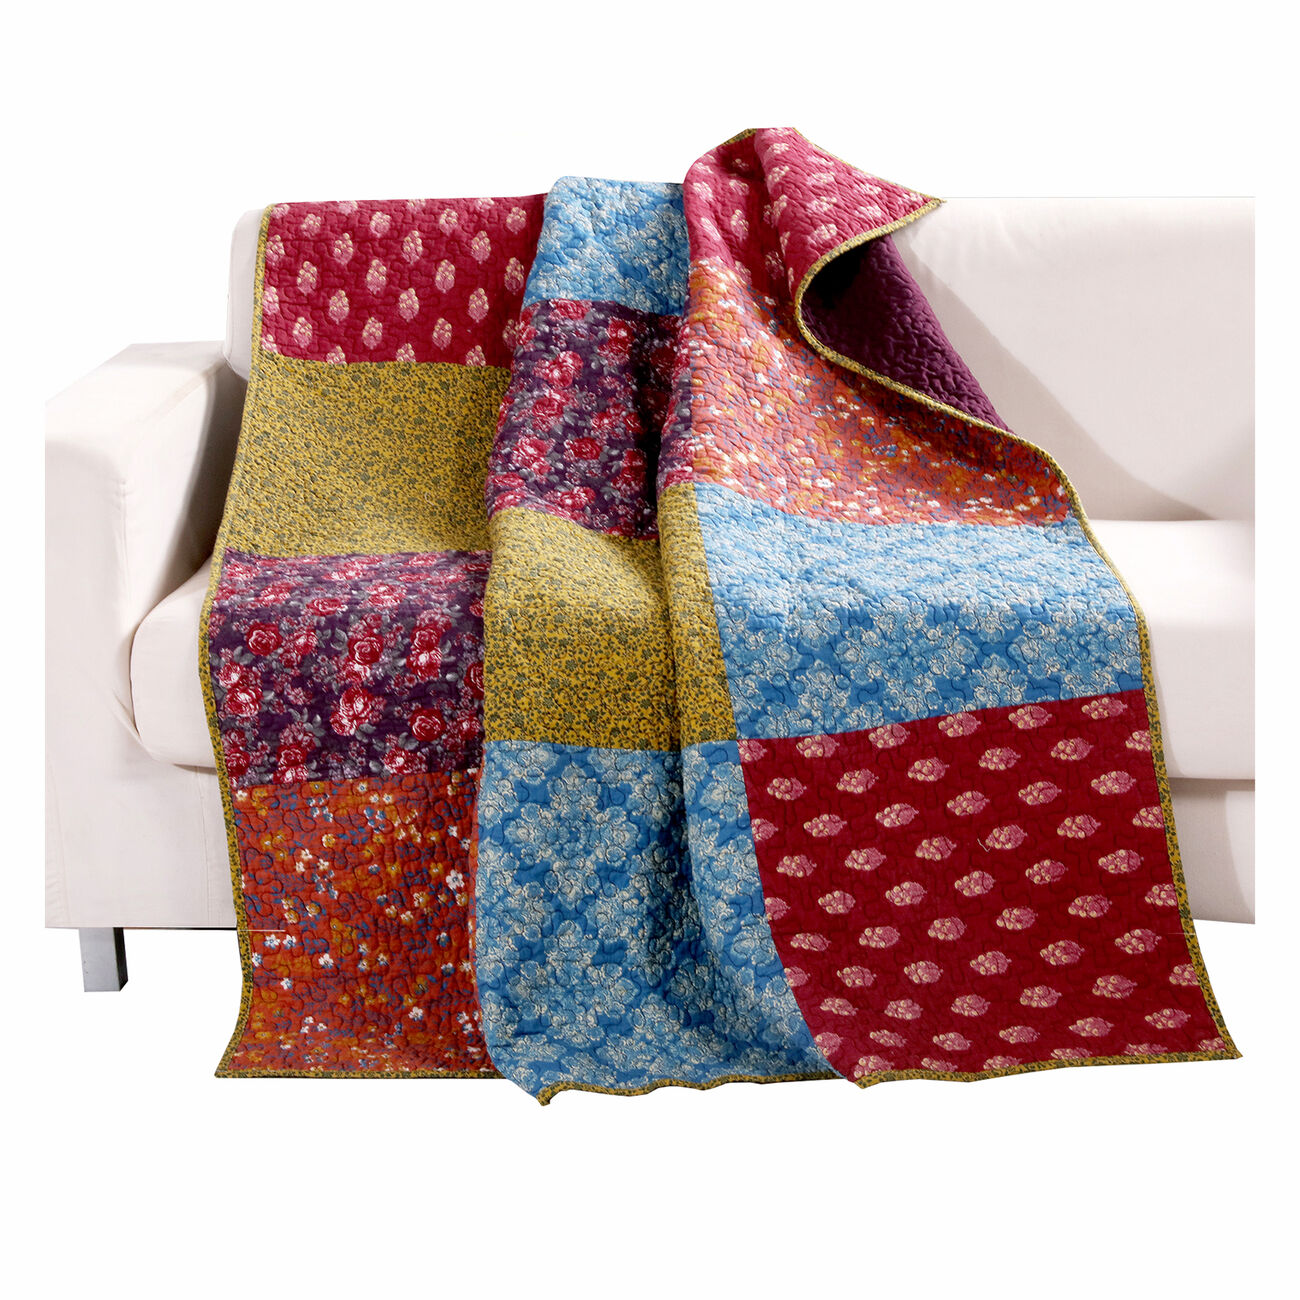 60 x 50 Inches Cotton Throw Blanket with Patchwork, Multicolor - BM223402